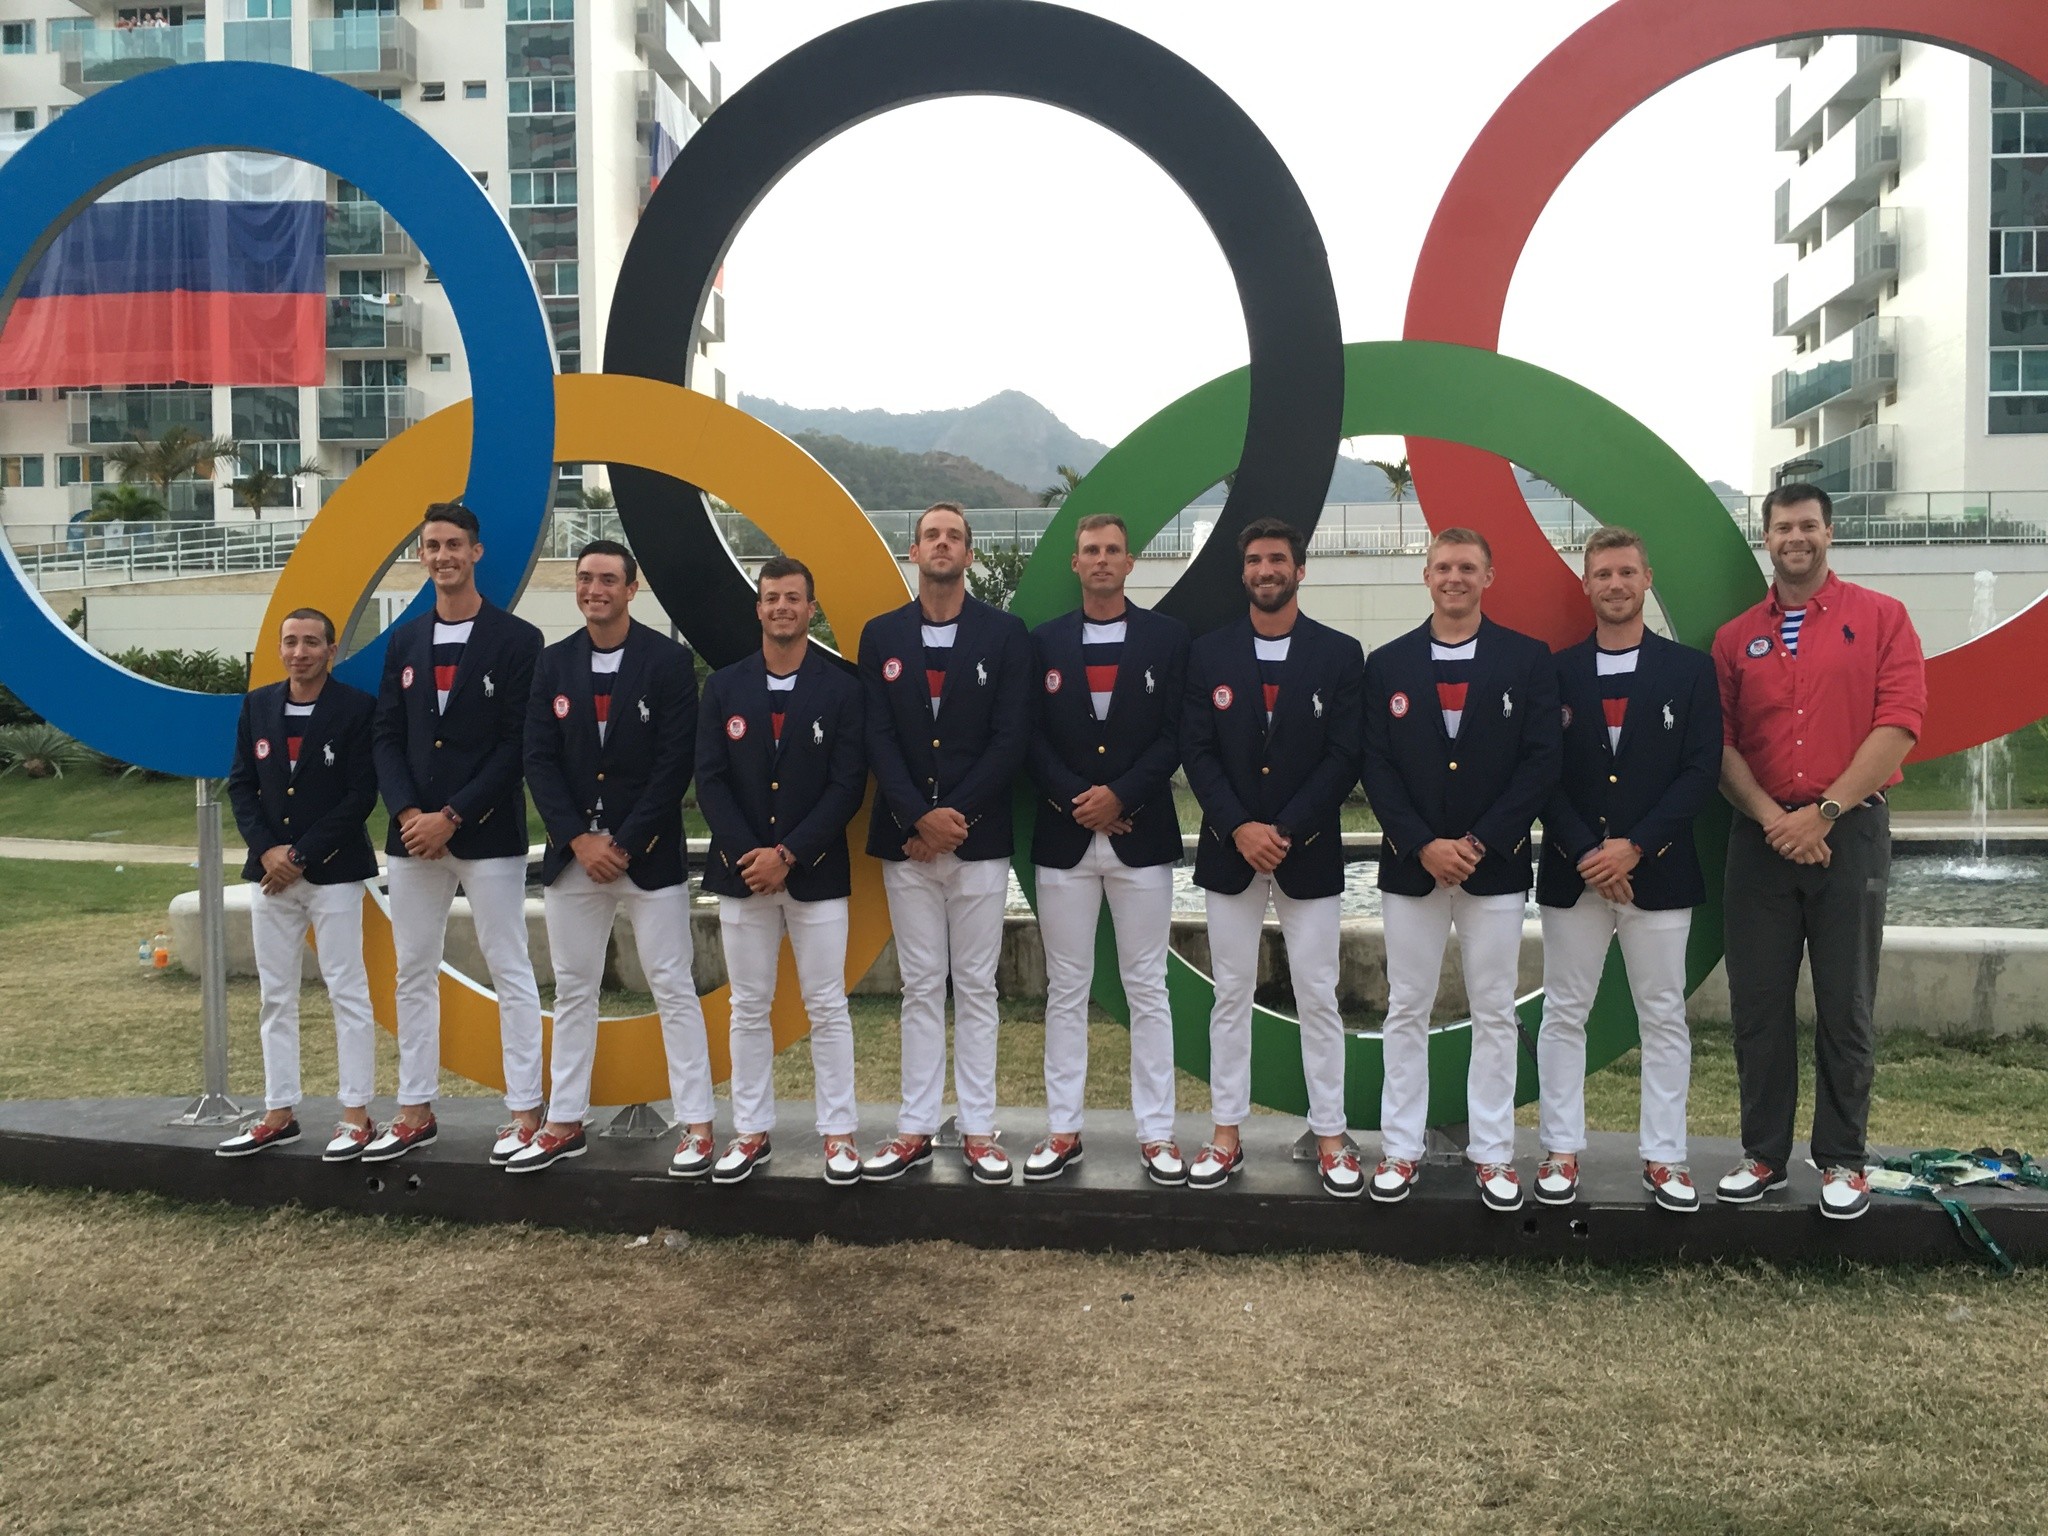 The United States men’s 8 rowing team in Rio. Redmond’s Rob Munn is third from left and Kirkland’s Hans Struzyna is third from right. Courtesy photo